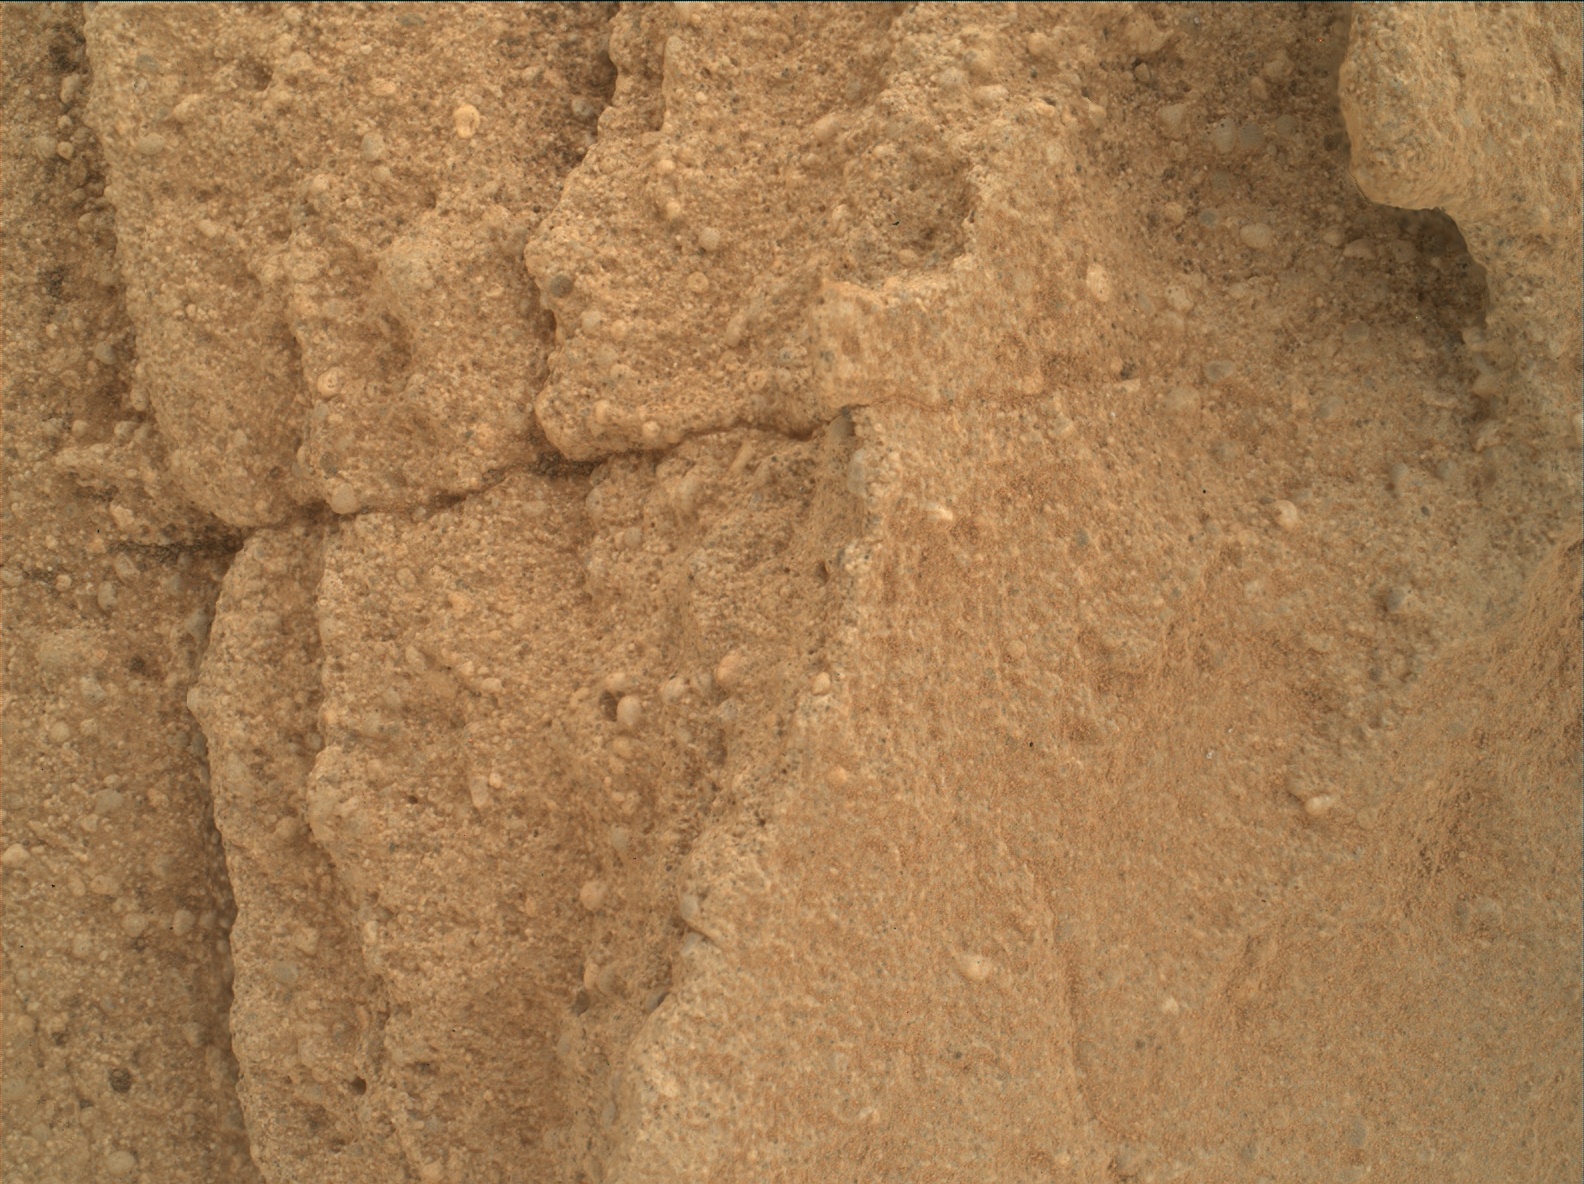 Nasa's Mars rover Curiosity acquired this image using its Mars Hand Lens Imager (MAHLI) on Sol 1091